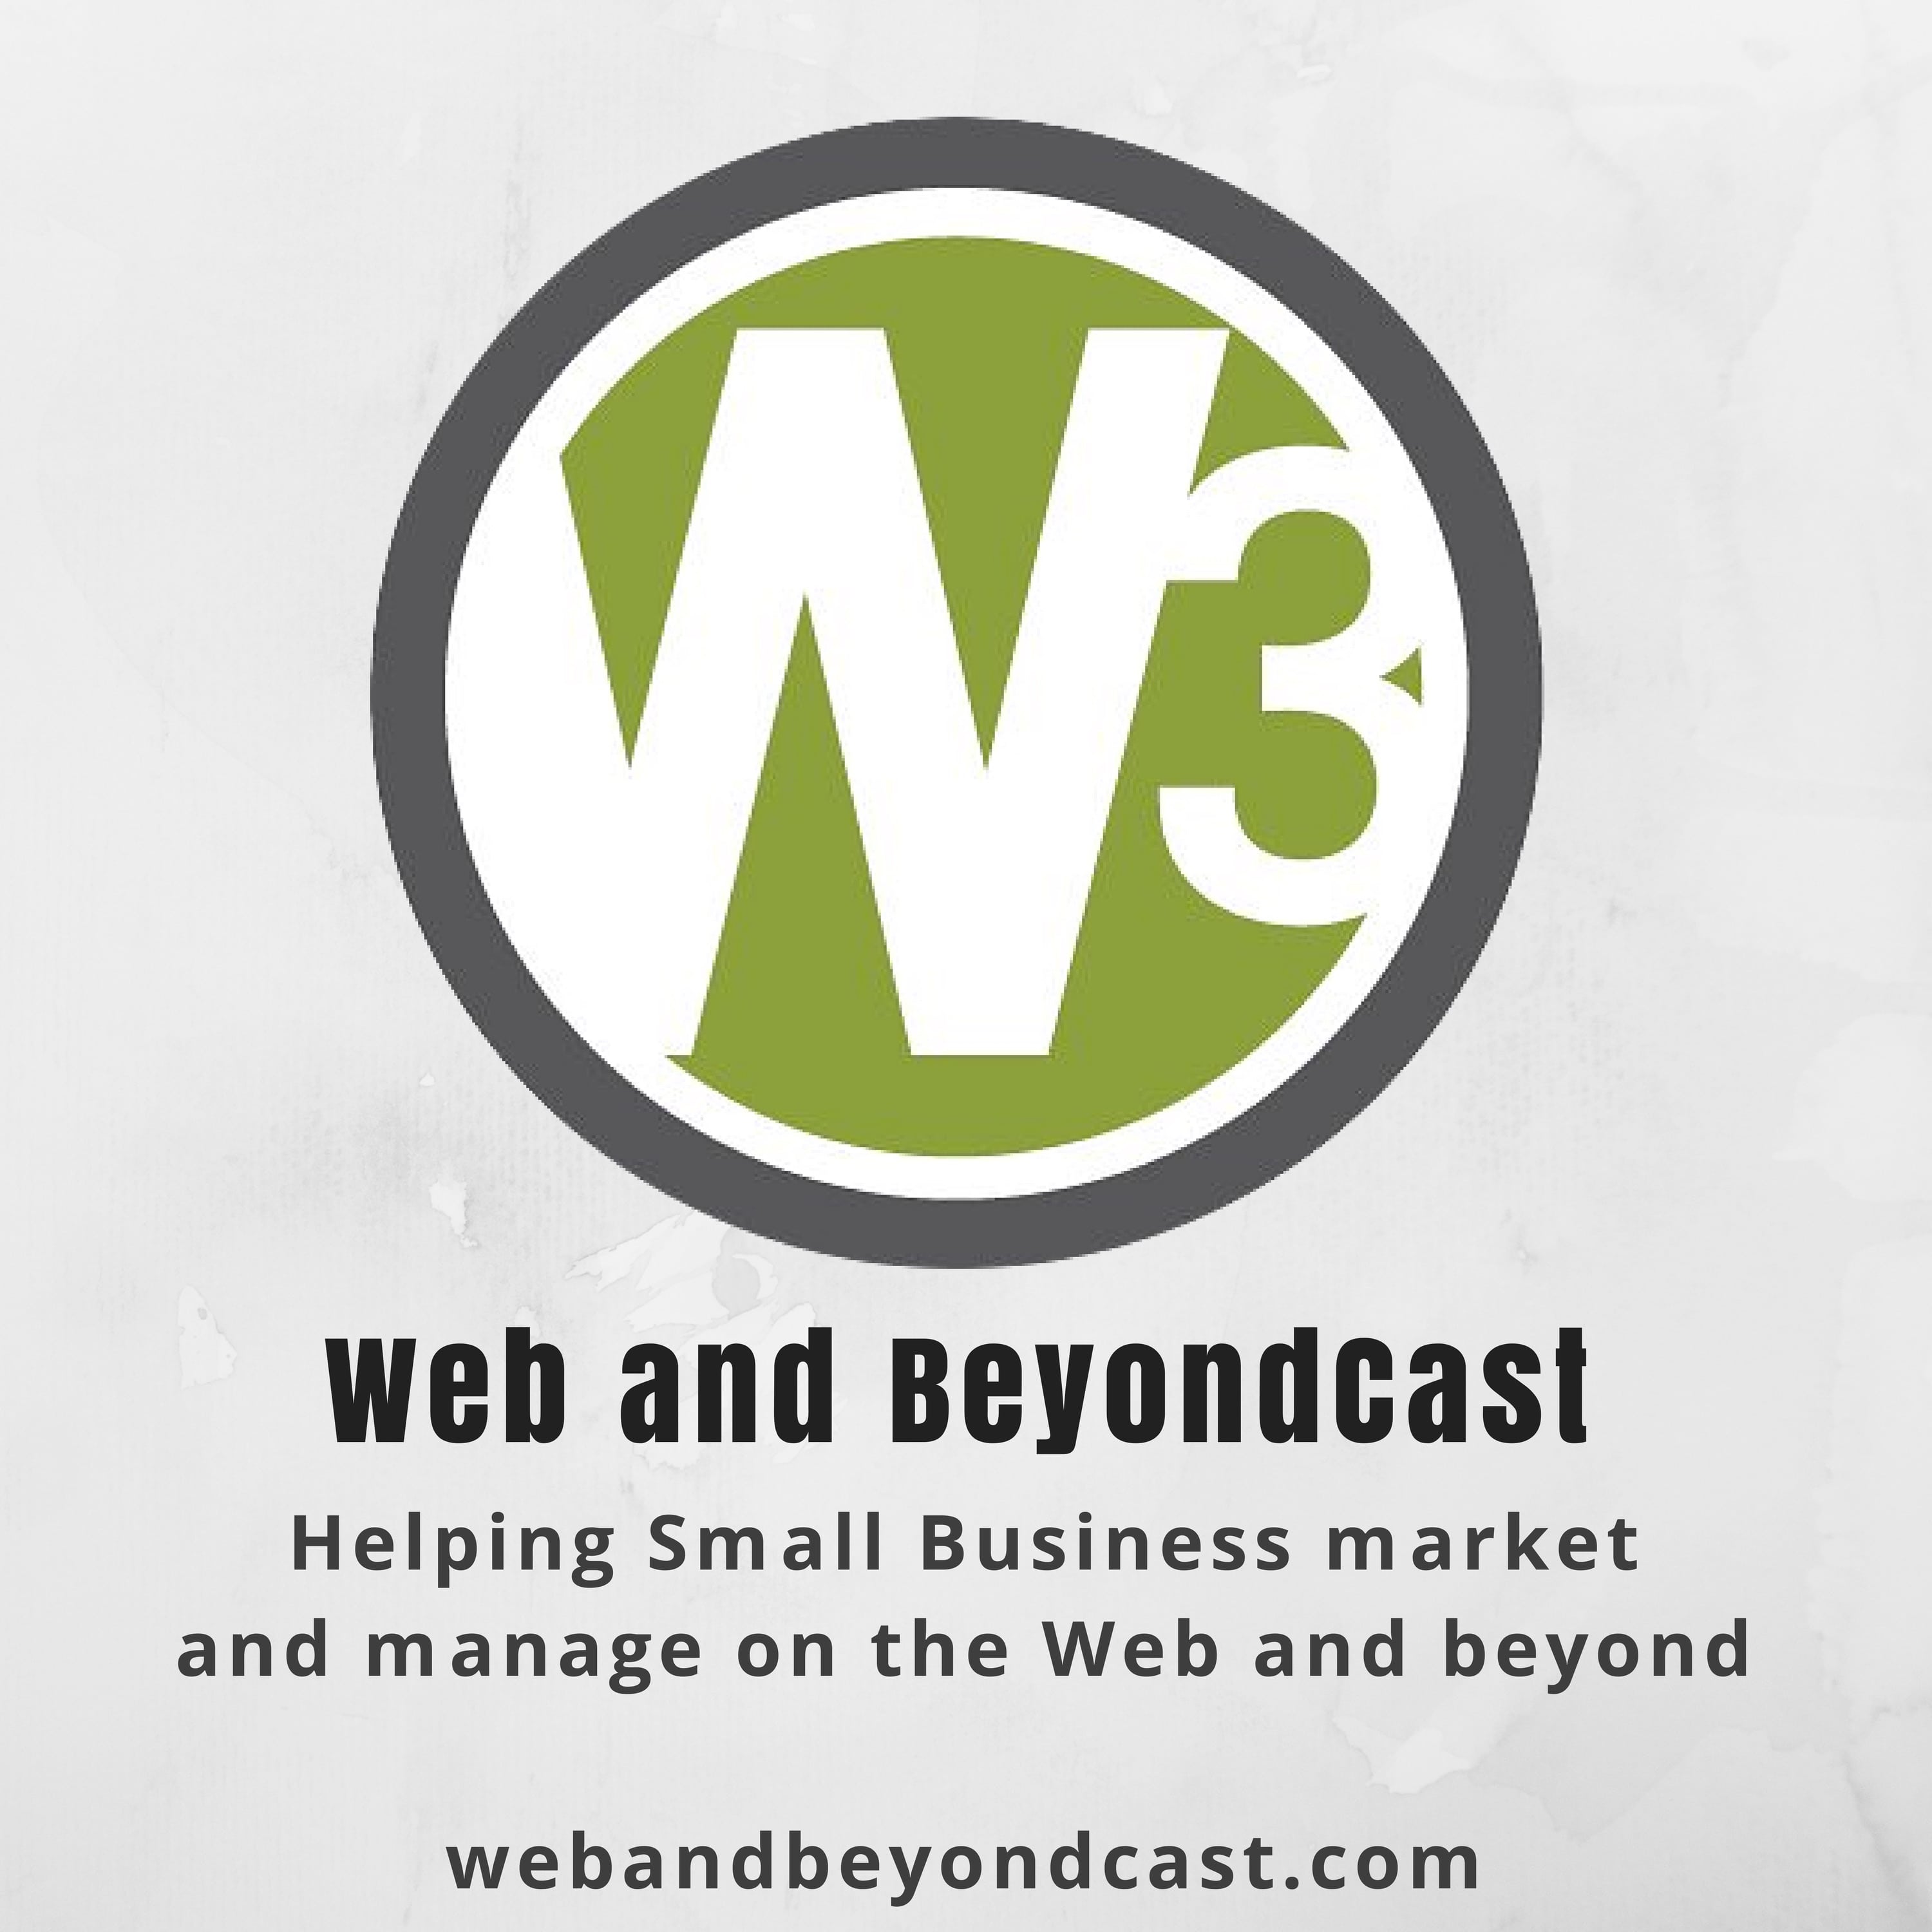 Web and BeyondCast, the Small Business Digital Marketing and Productivity Technology Show